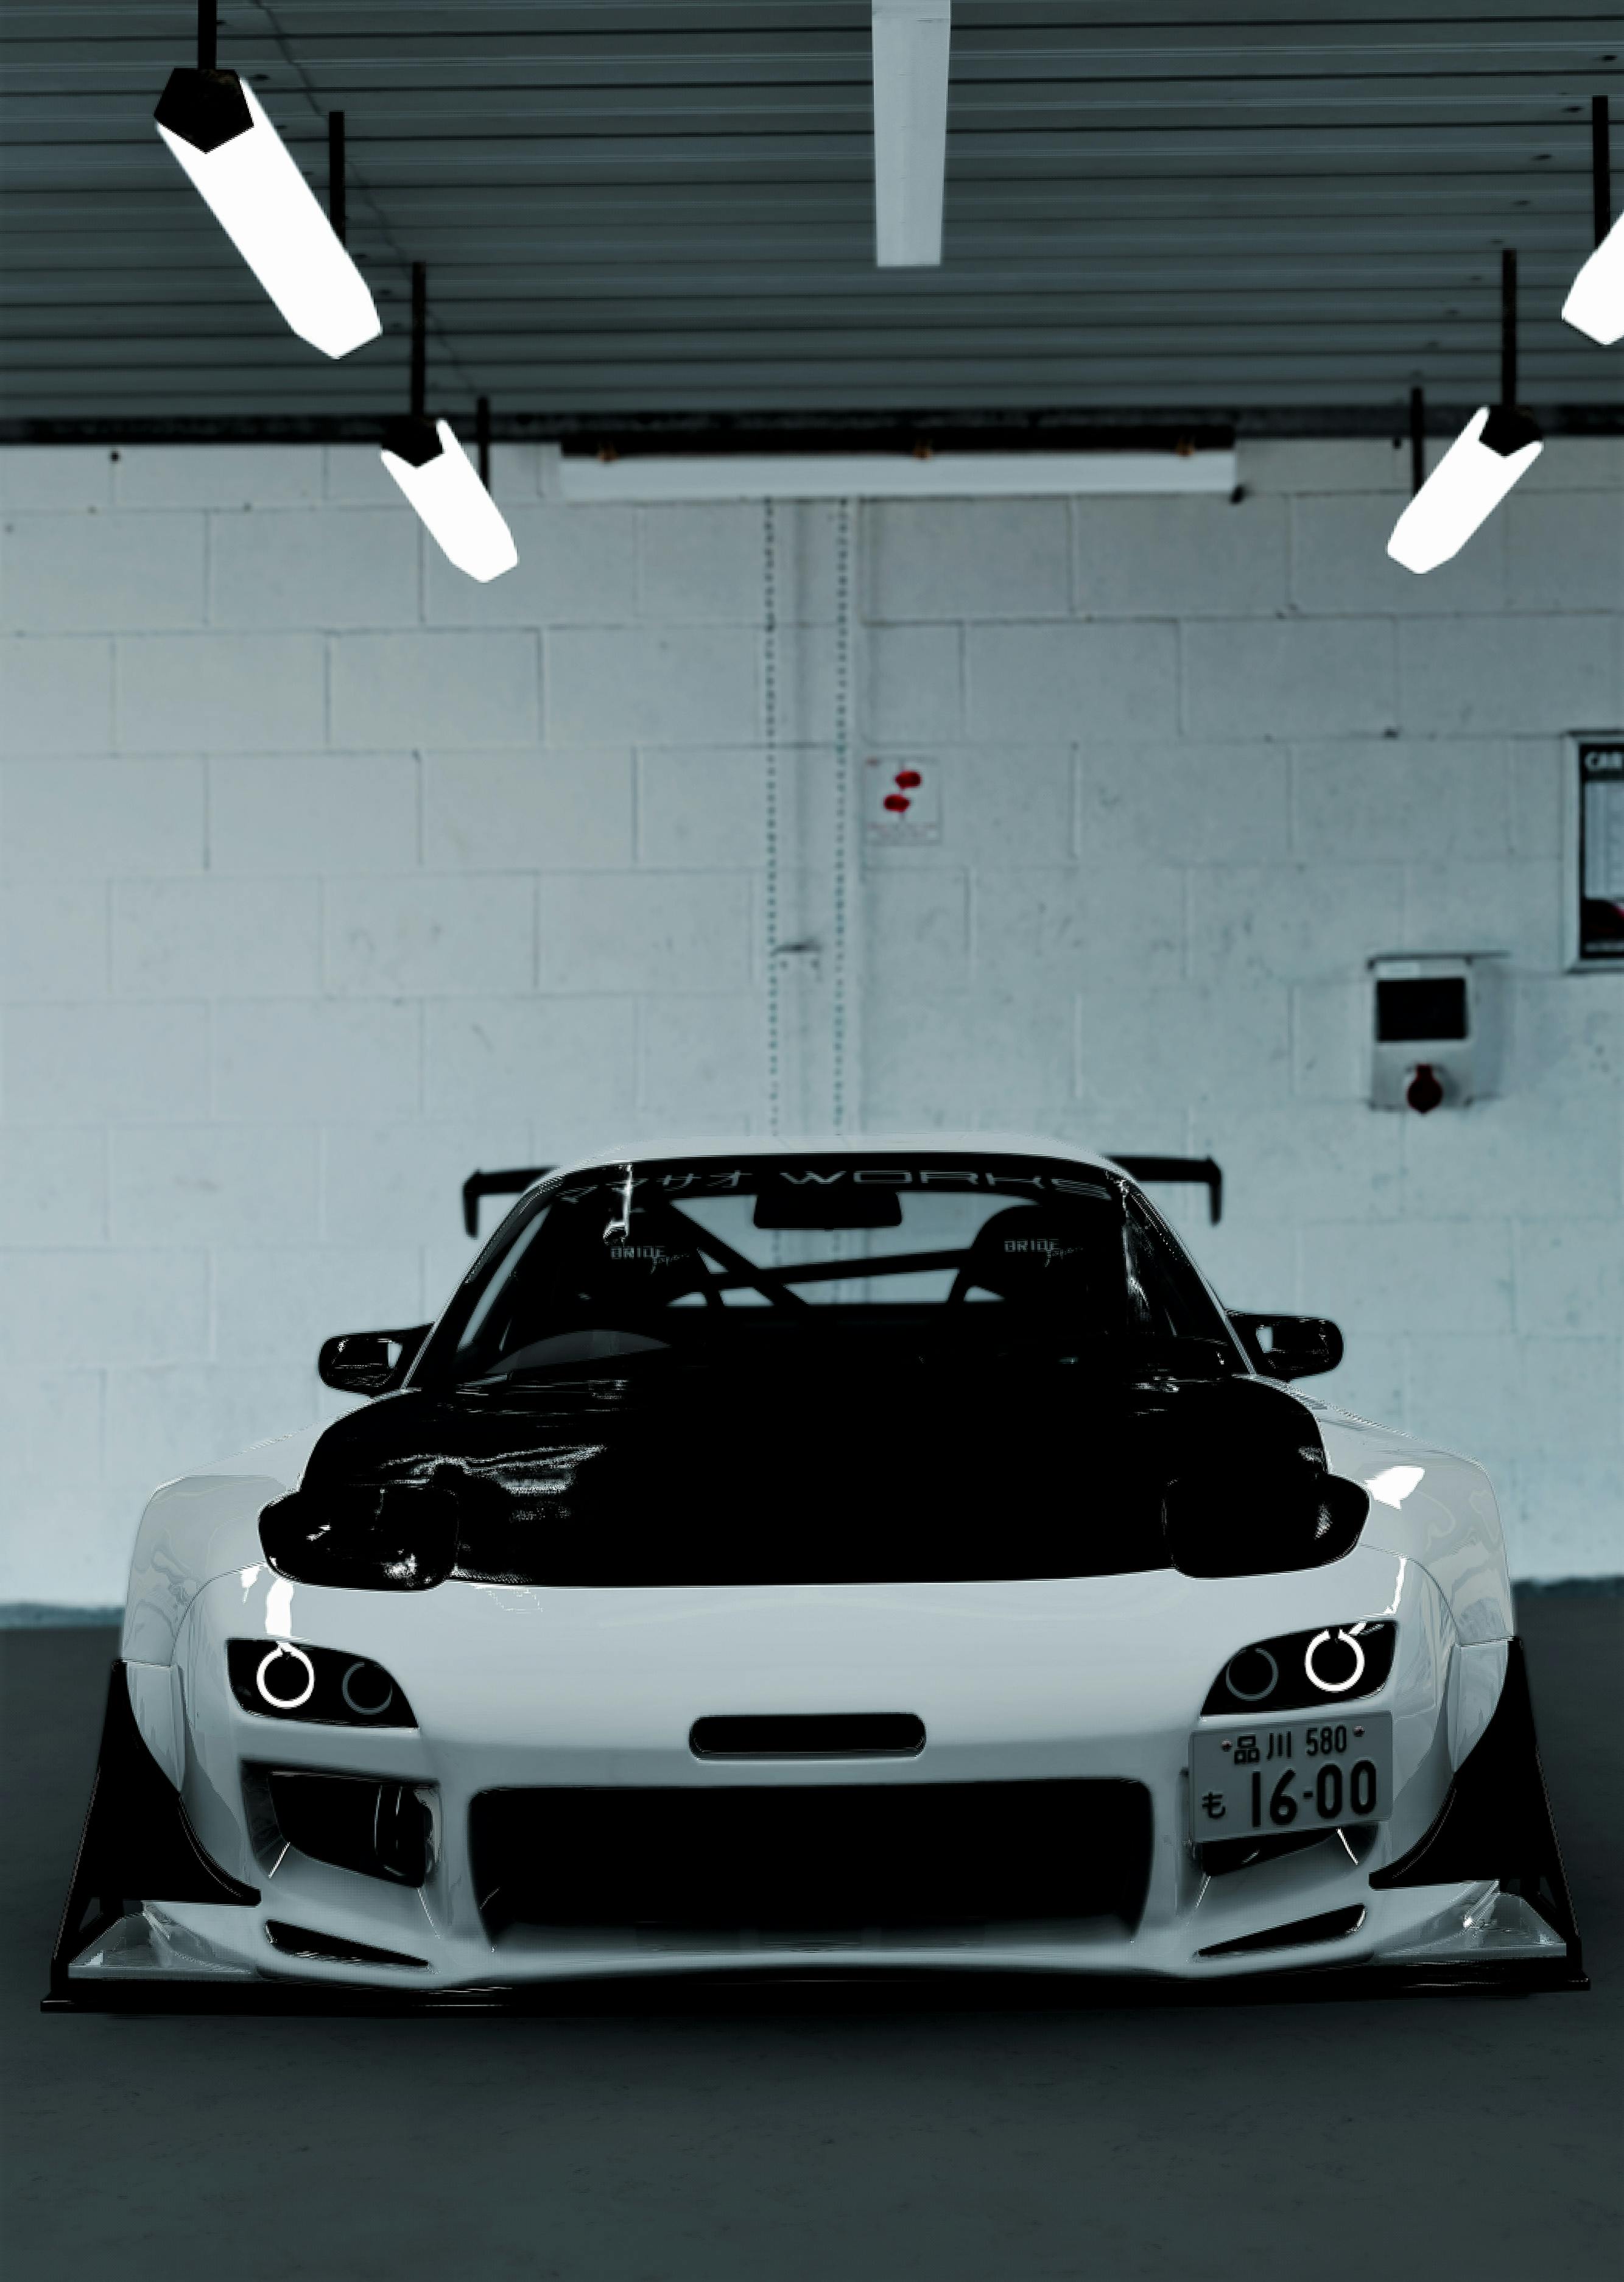 4K Mazda RX7 Wallpapers  Background Images